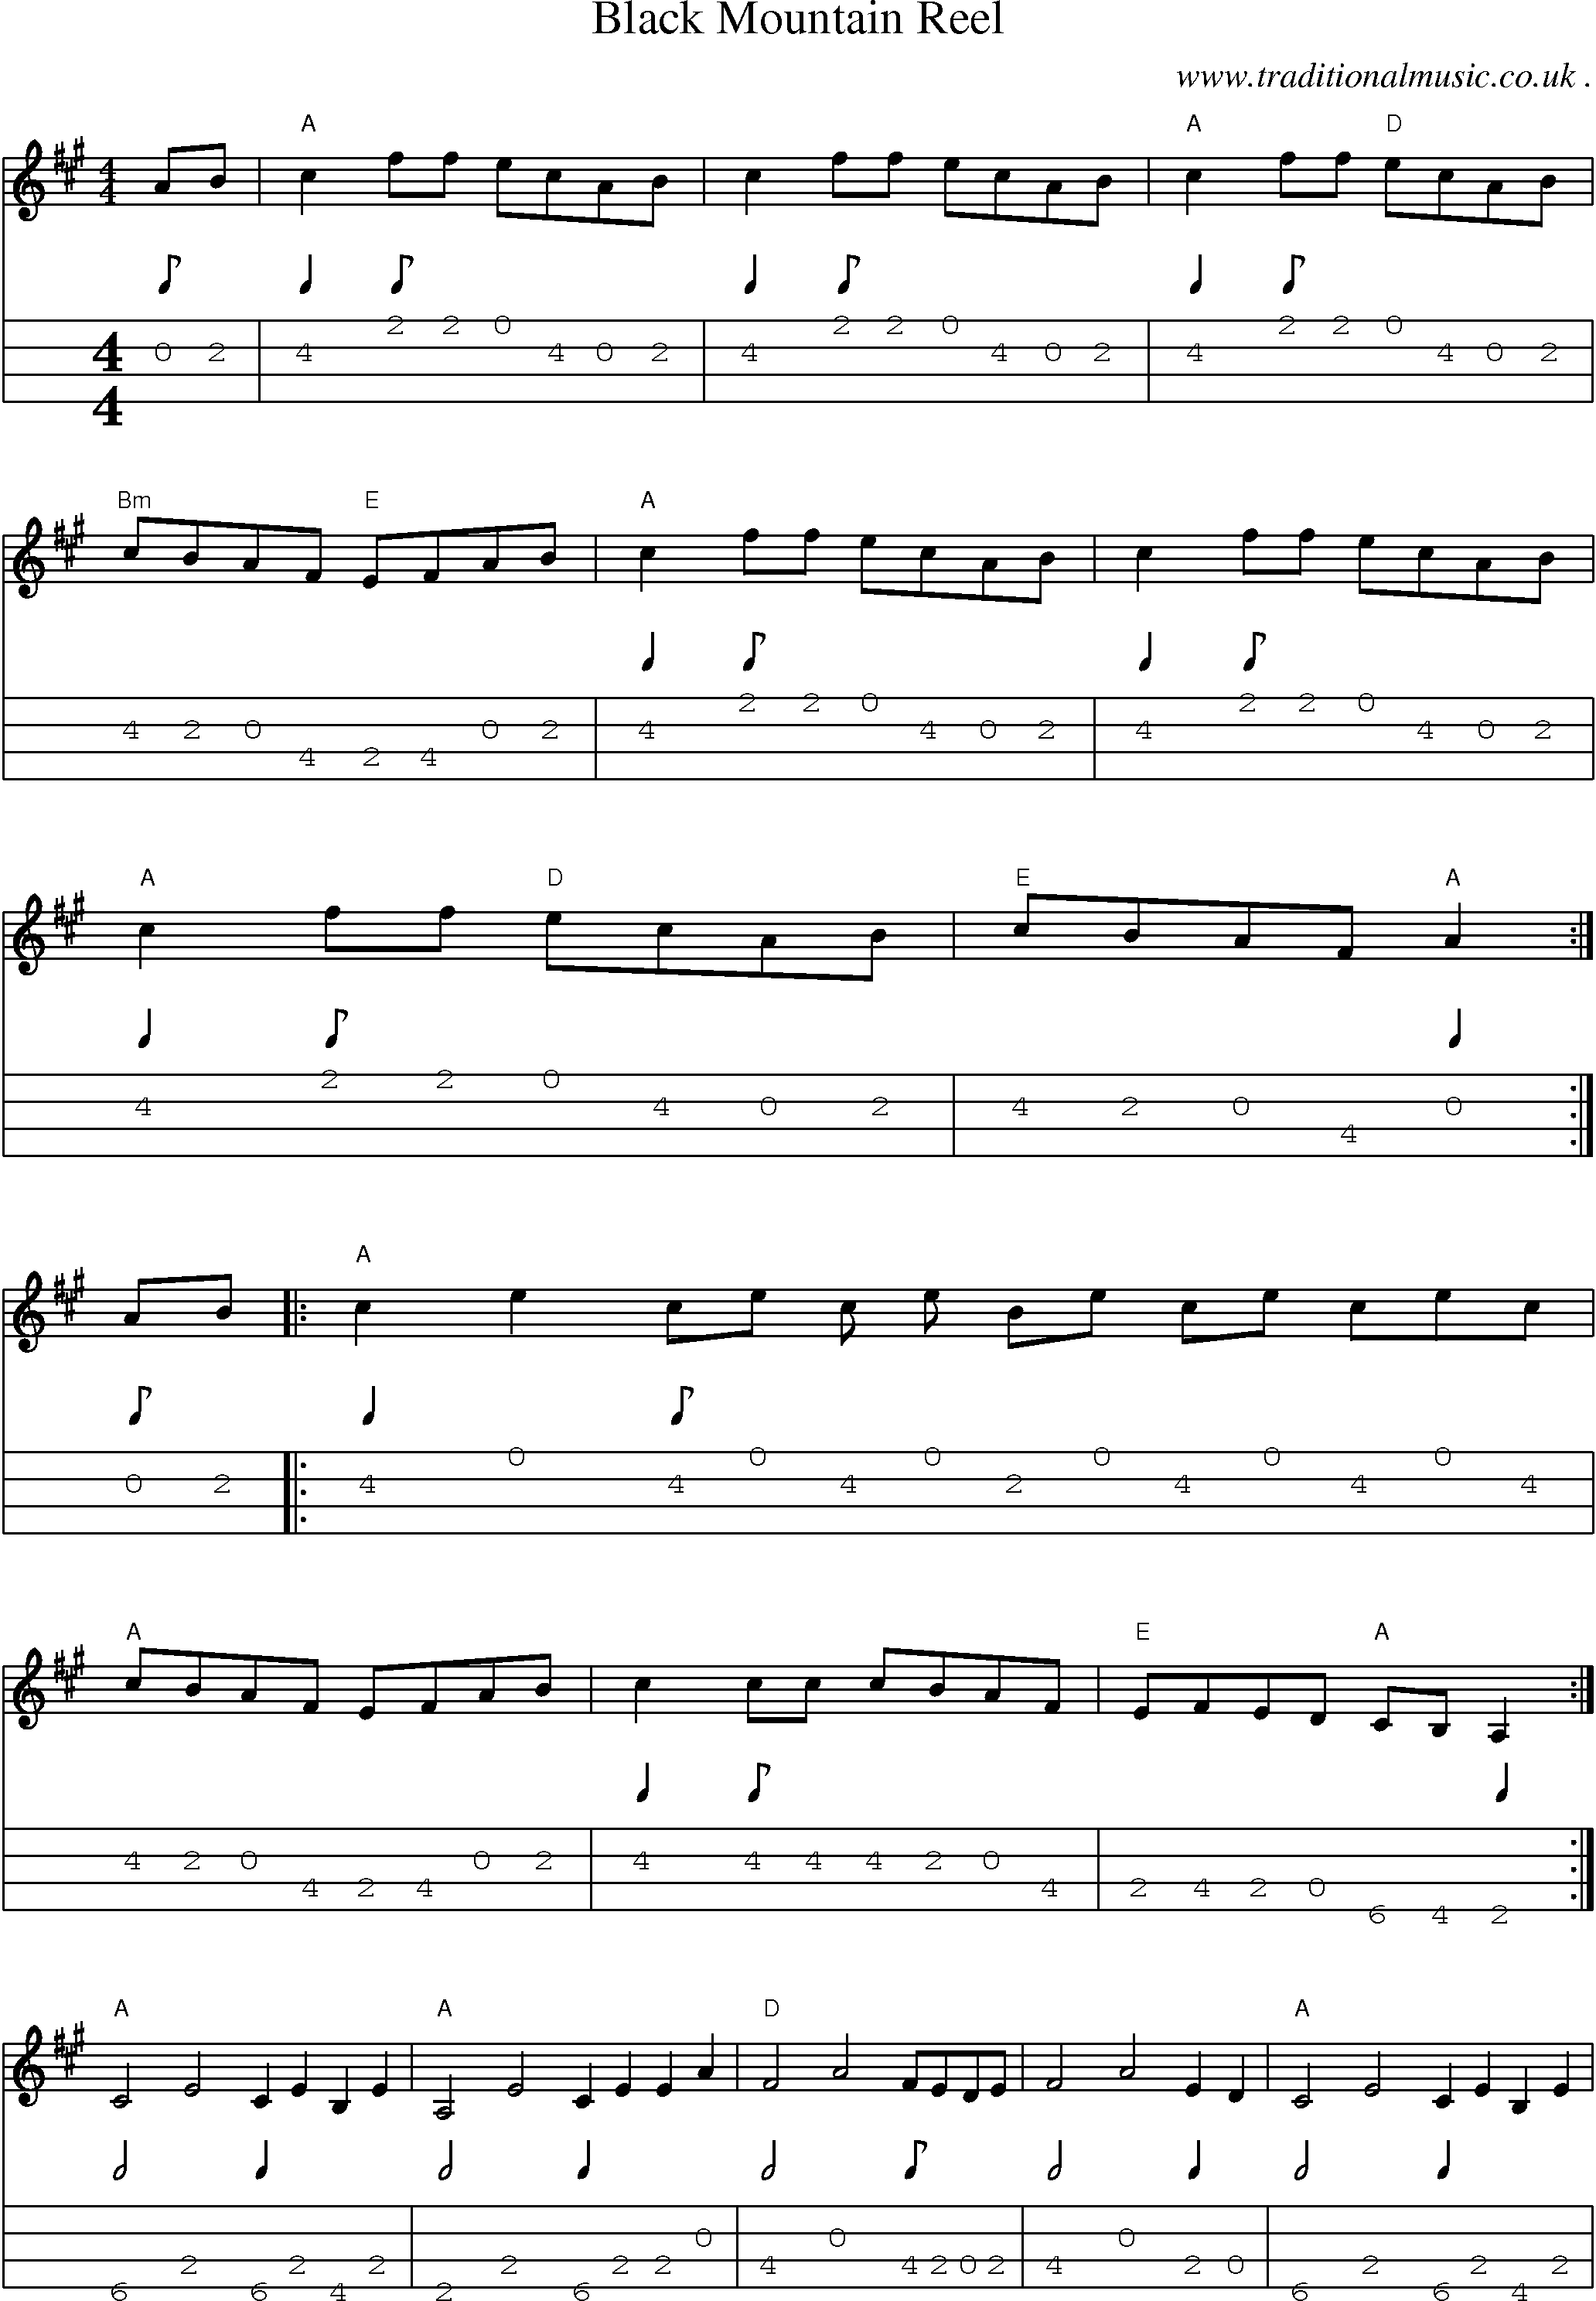 Music Score and Guitar Tabs for Black Mountain Reel